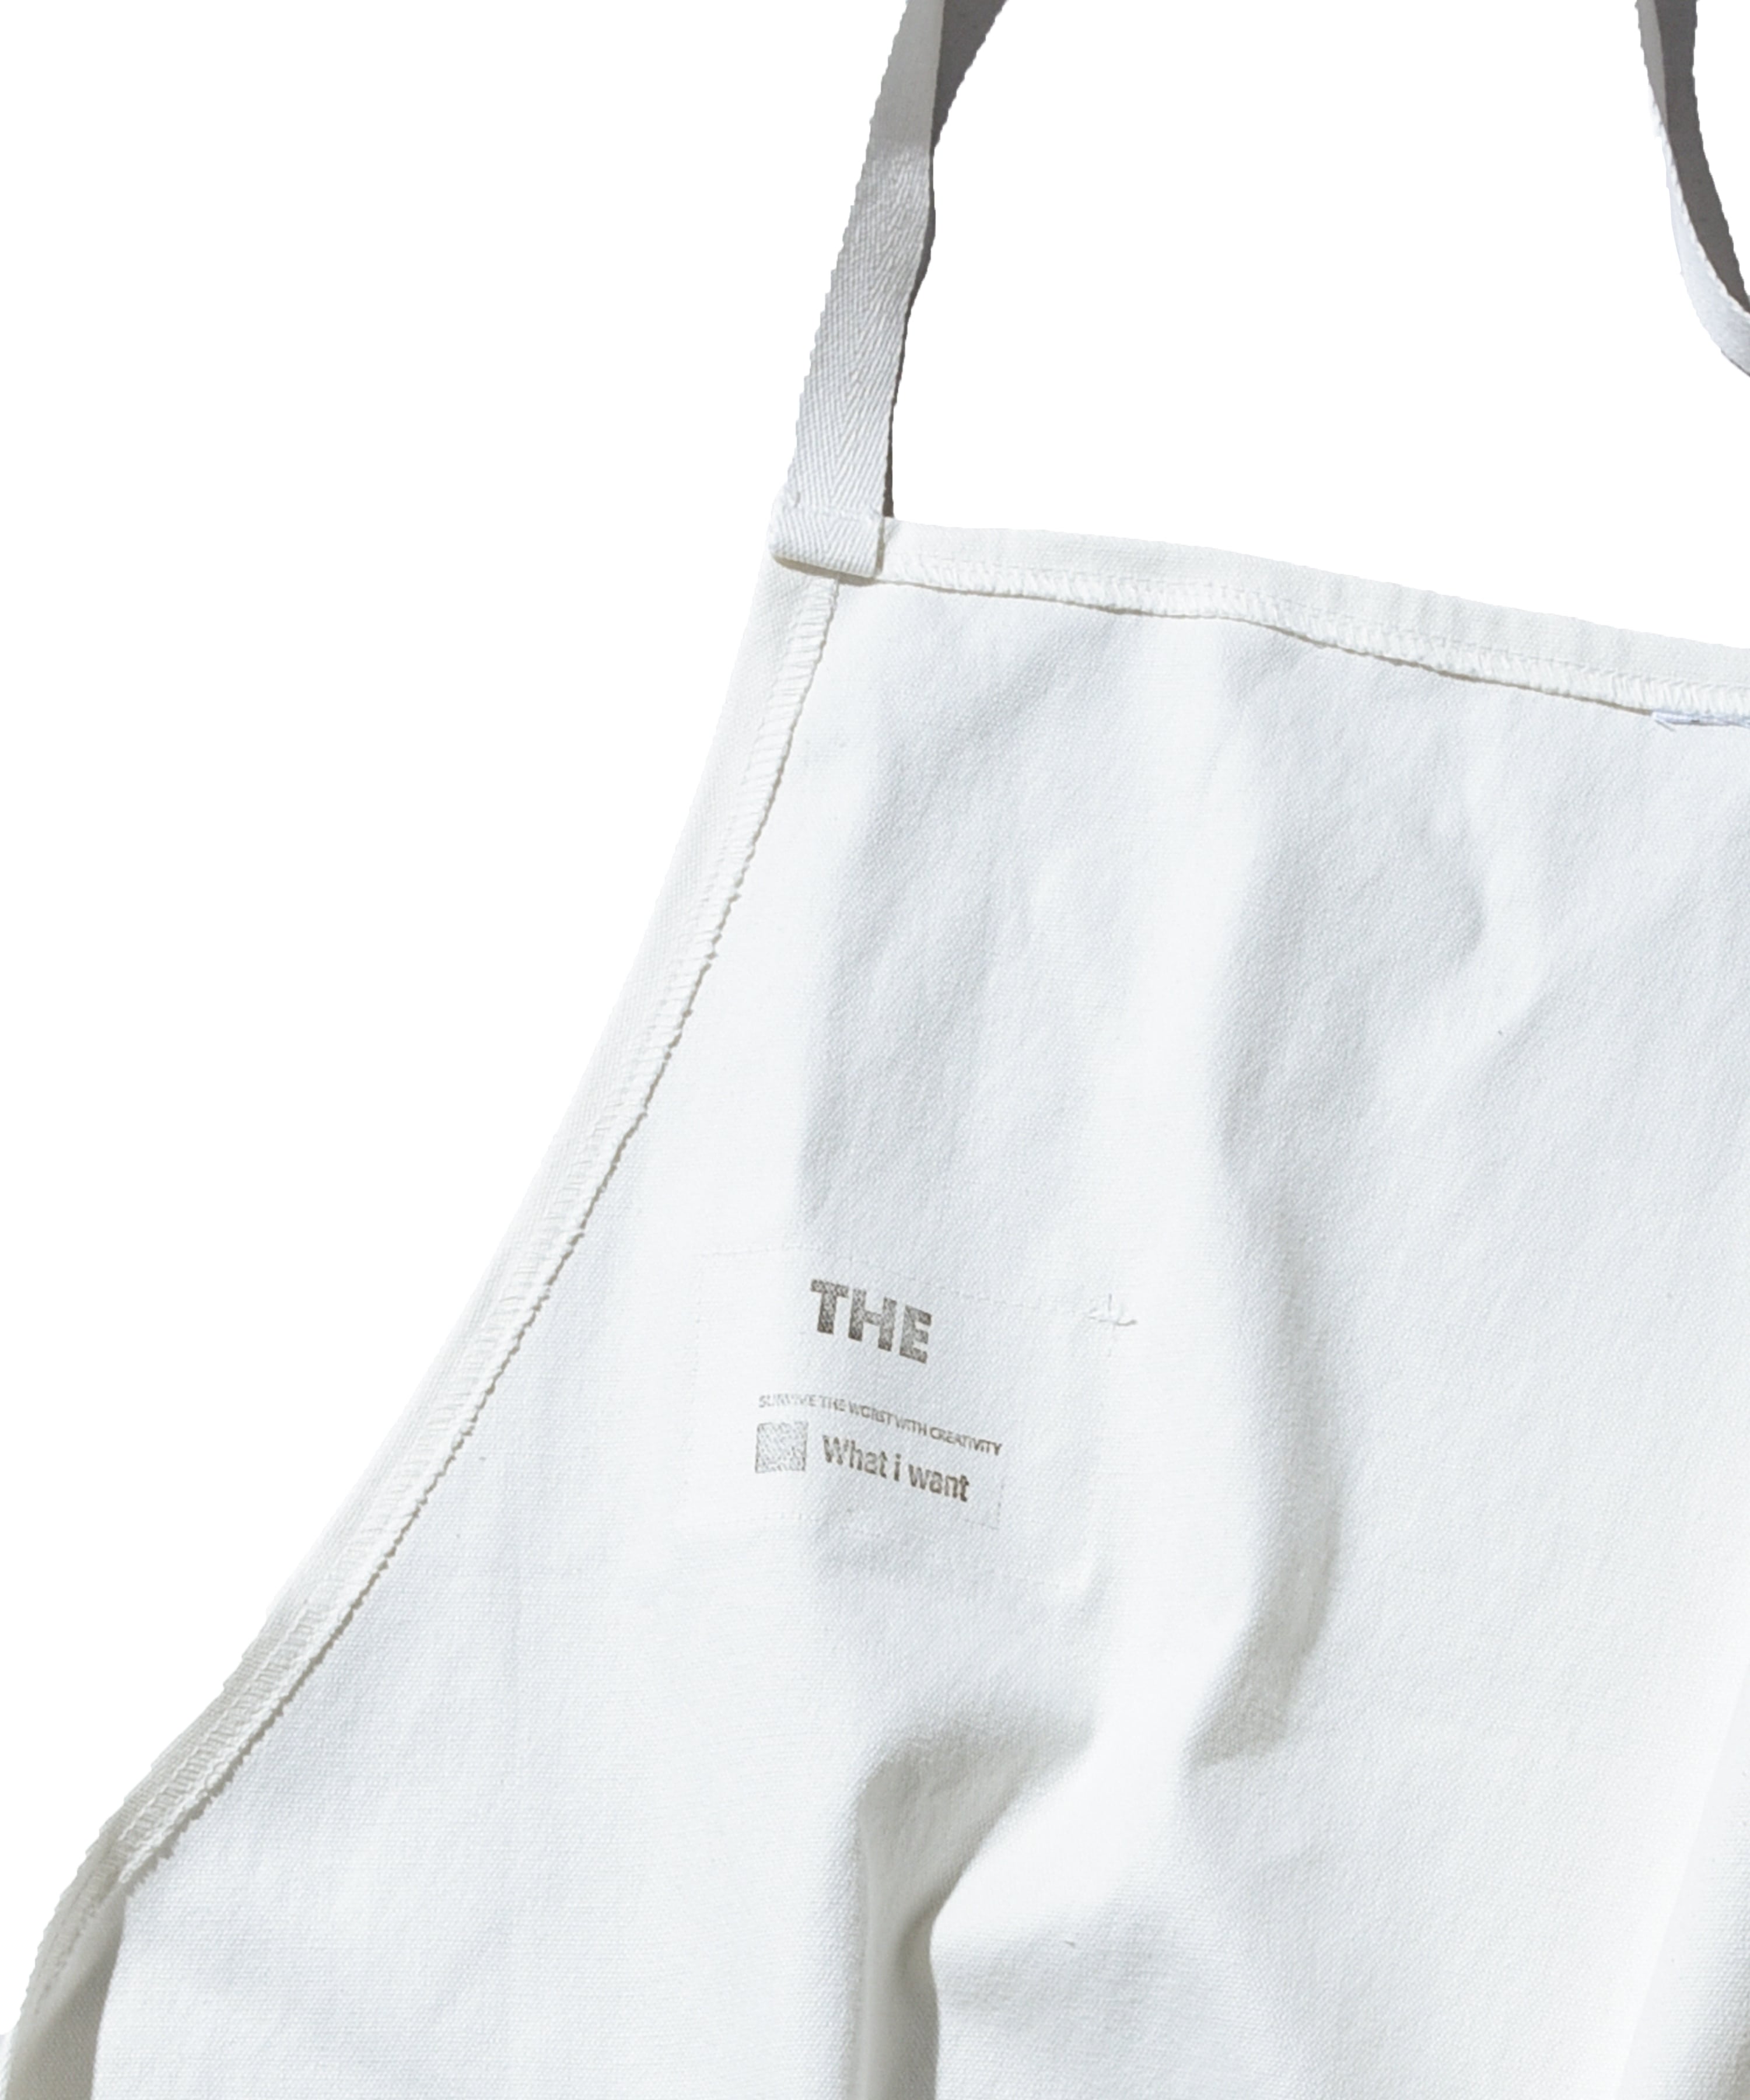 THE STORE APRON